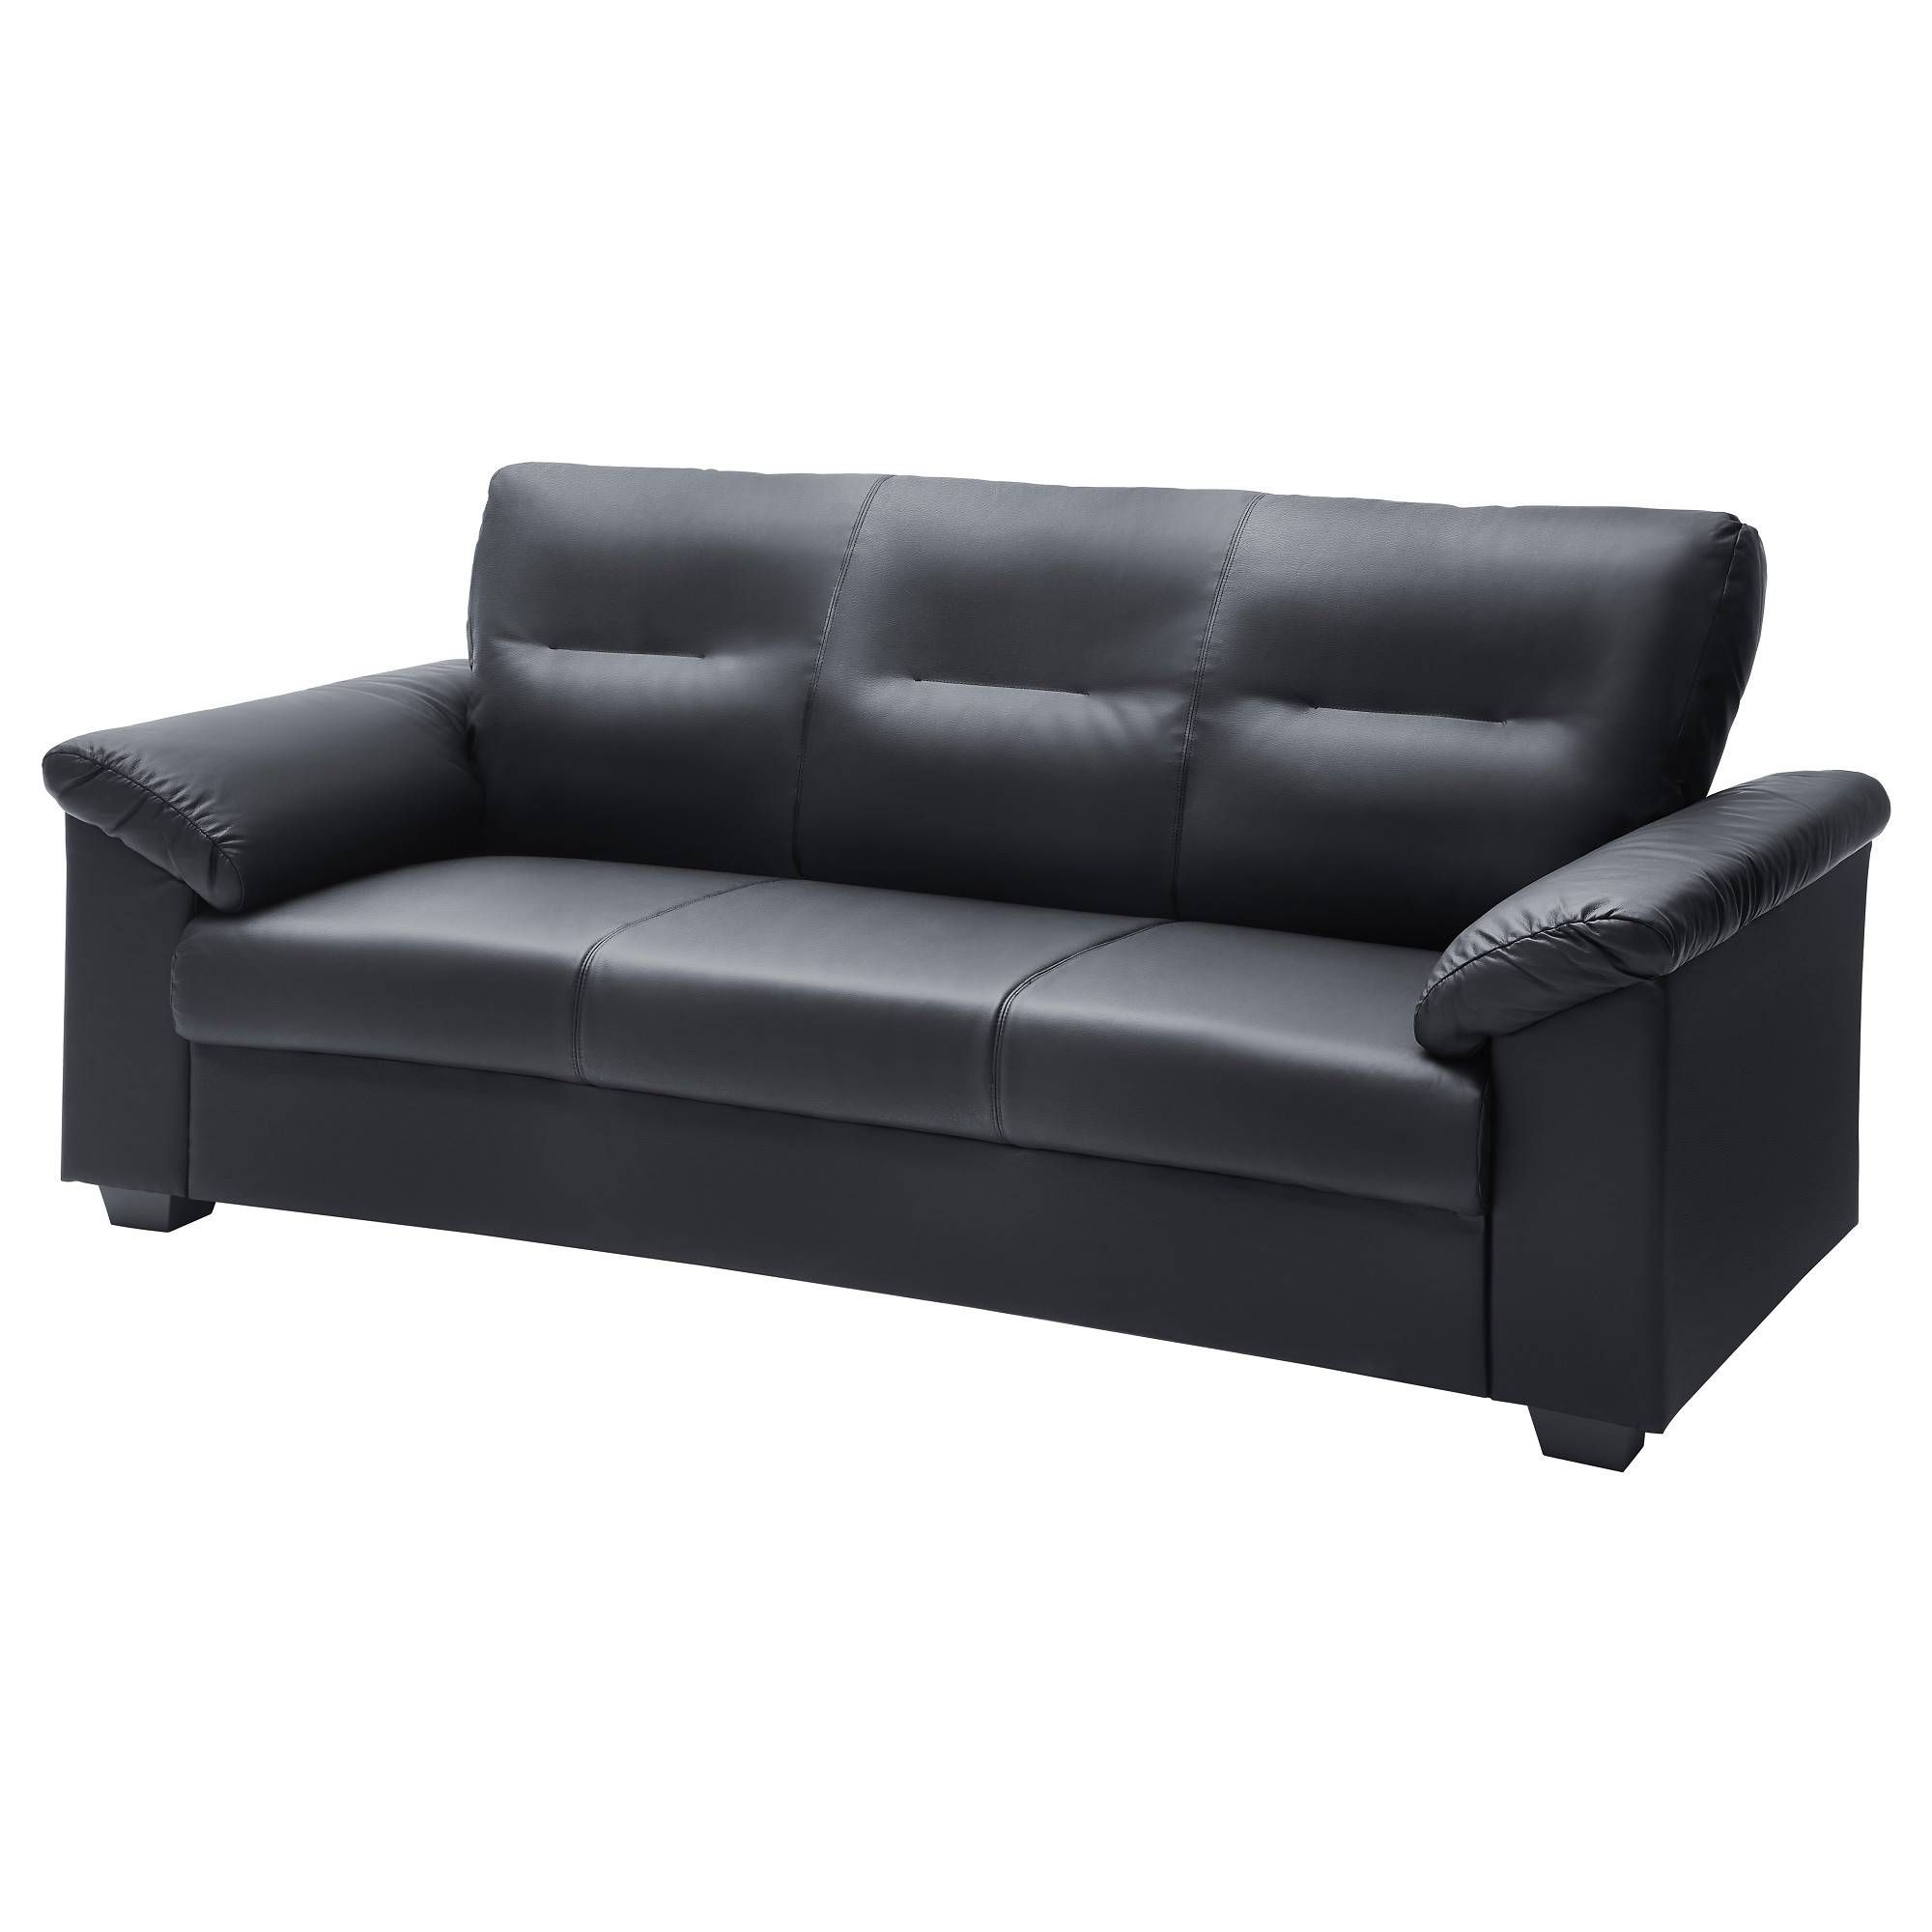 Beautiful Black Modern Couches Furniture Remarkable With Throughout Sleek Sectional Sofa (View 24 of 25)